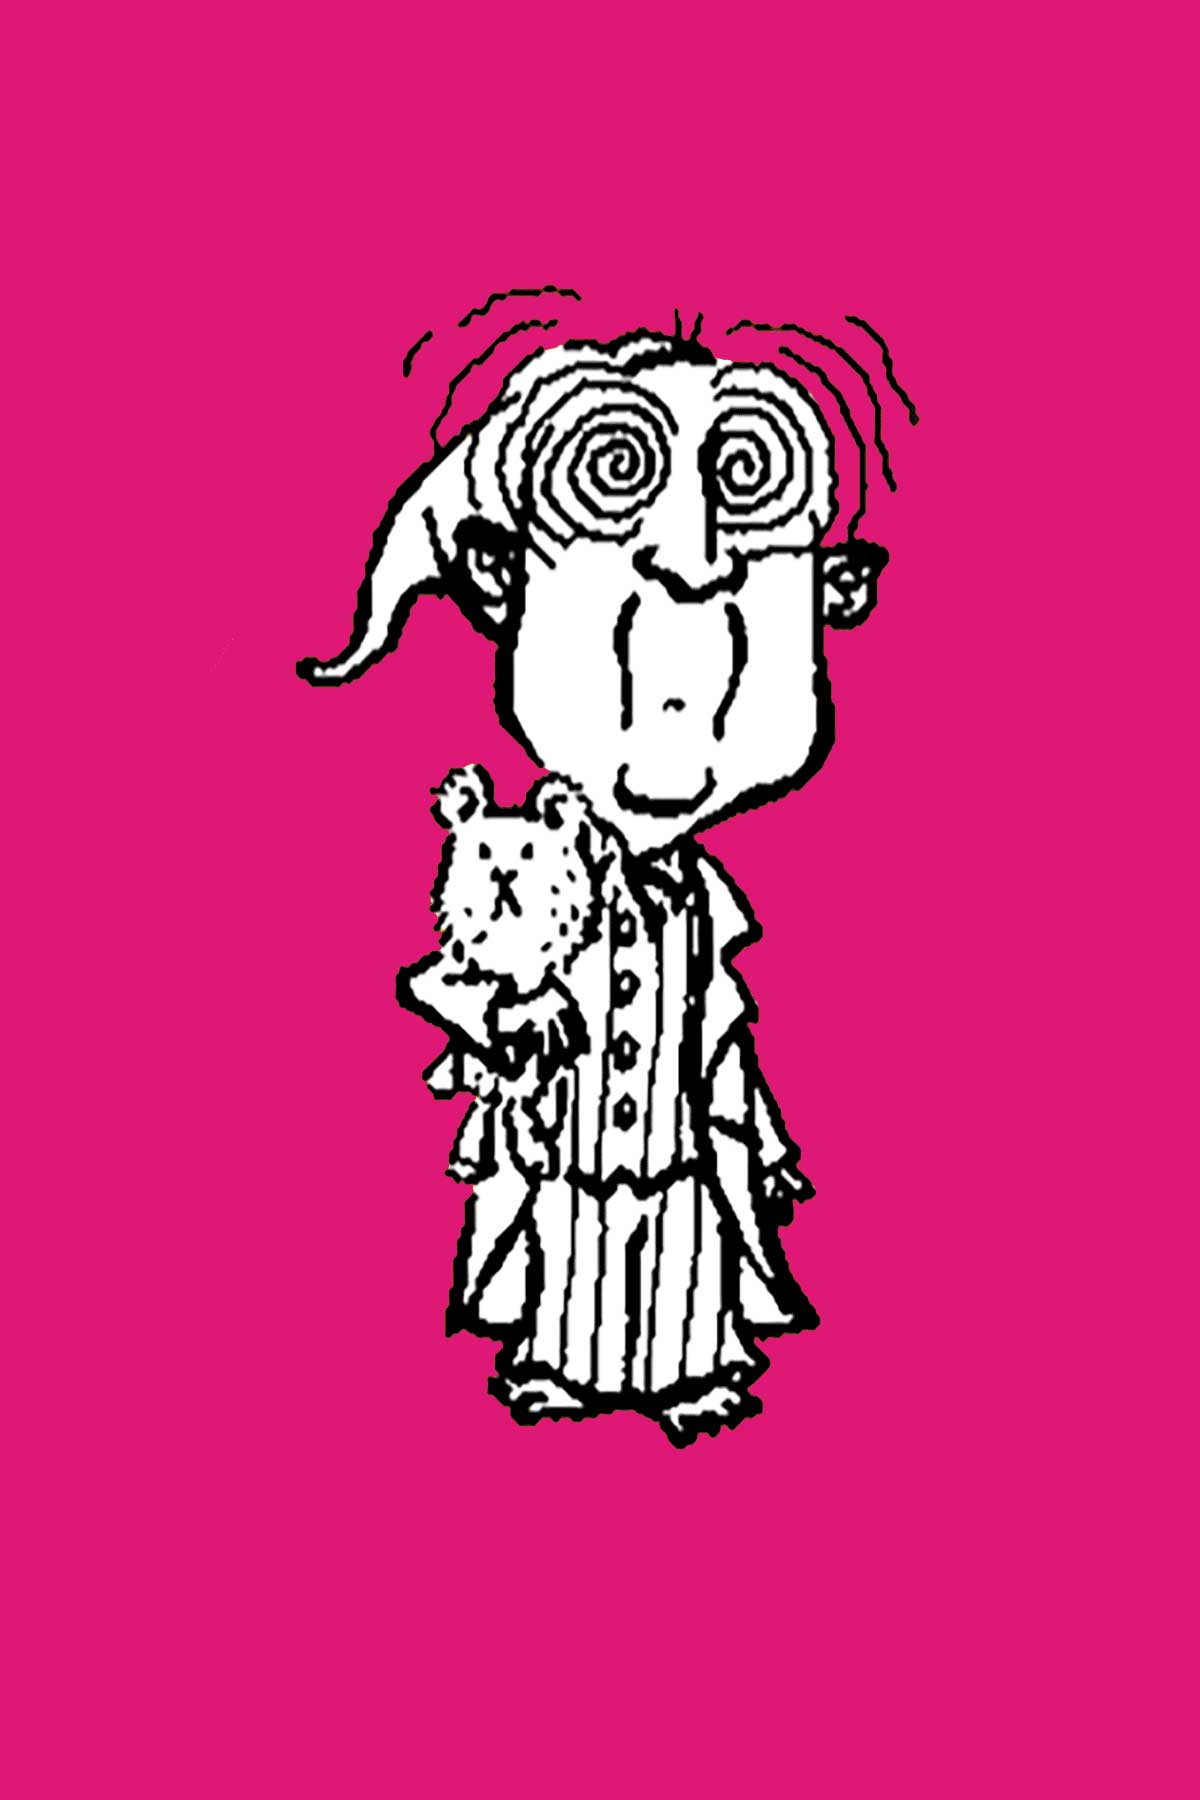 An illustration of a man in pajamas with pinwheels for eyes.